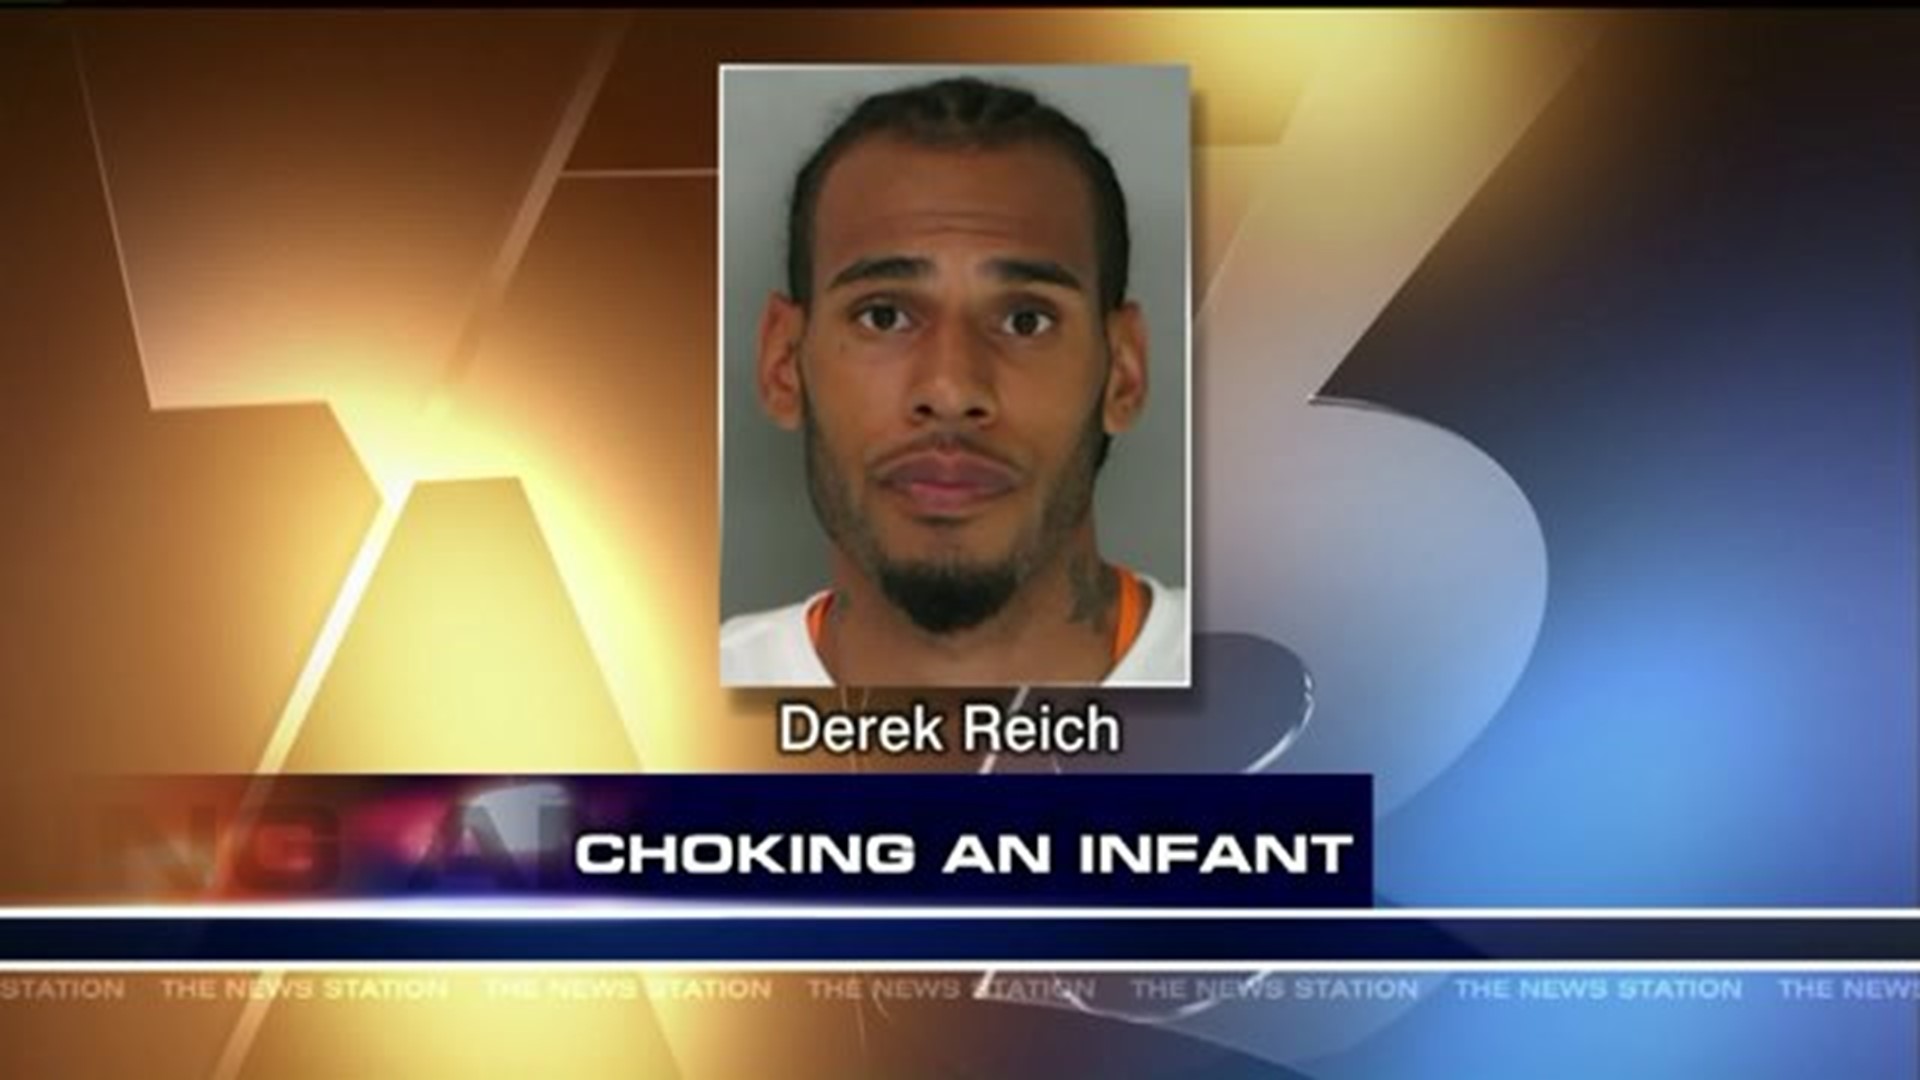 Man Accused of Choking Infant Escapes Police Custody